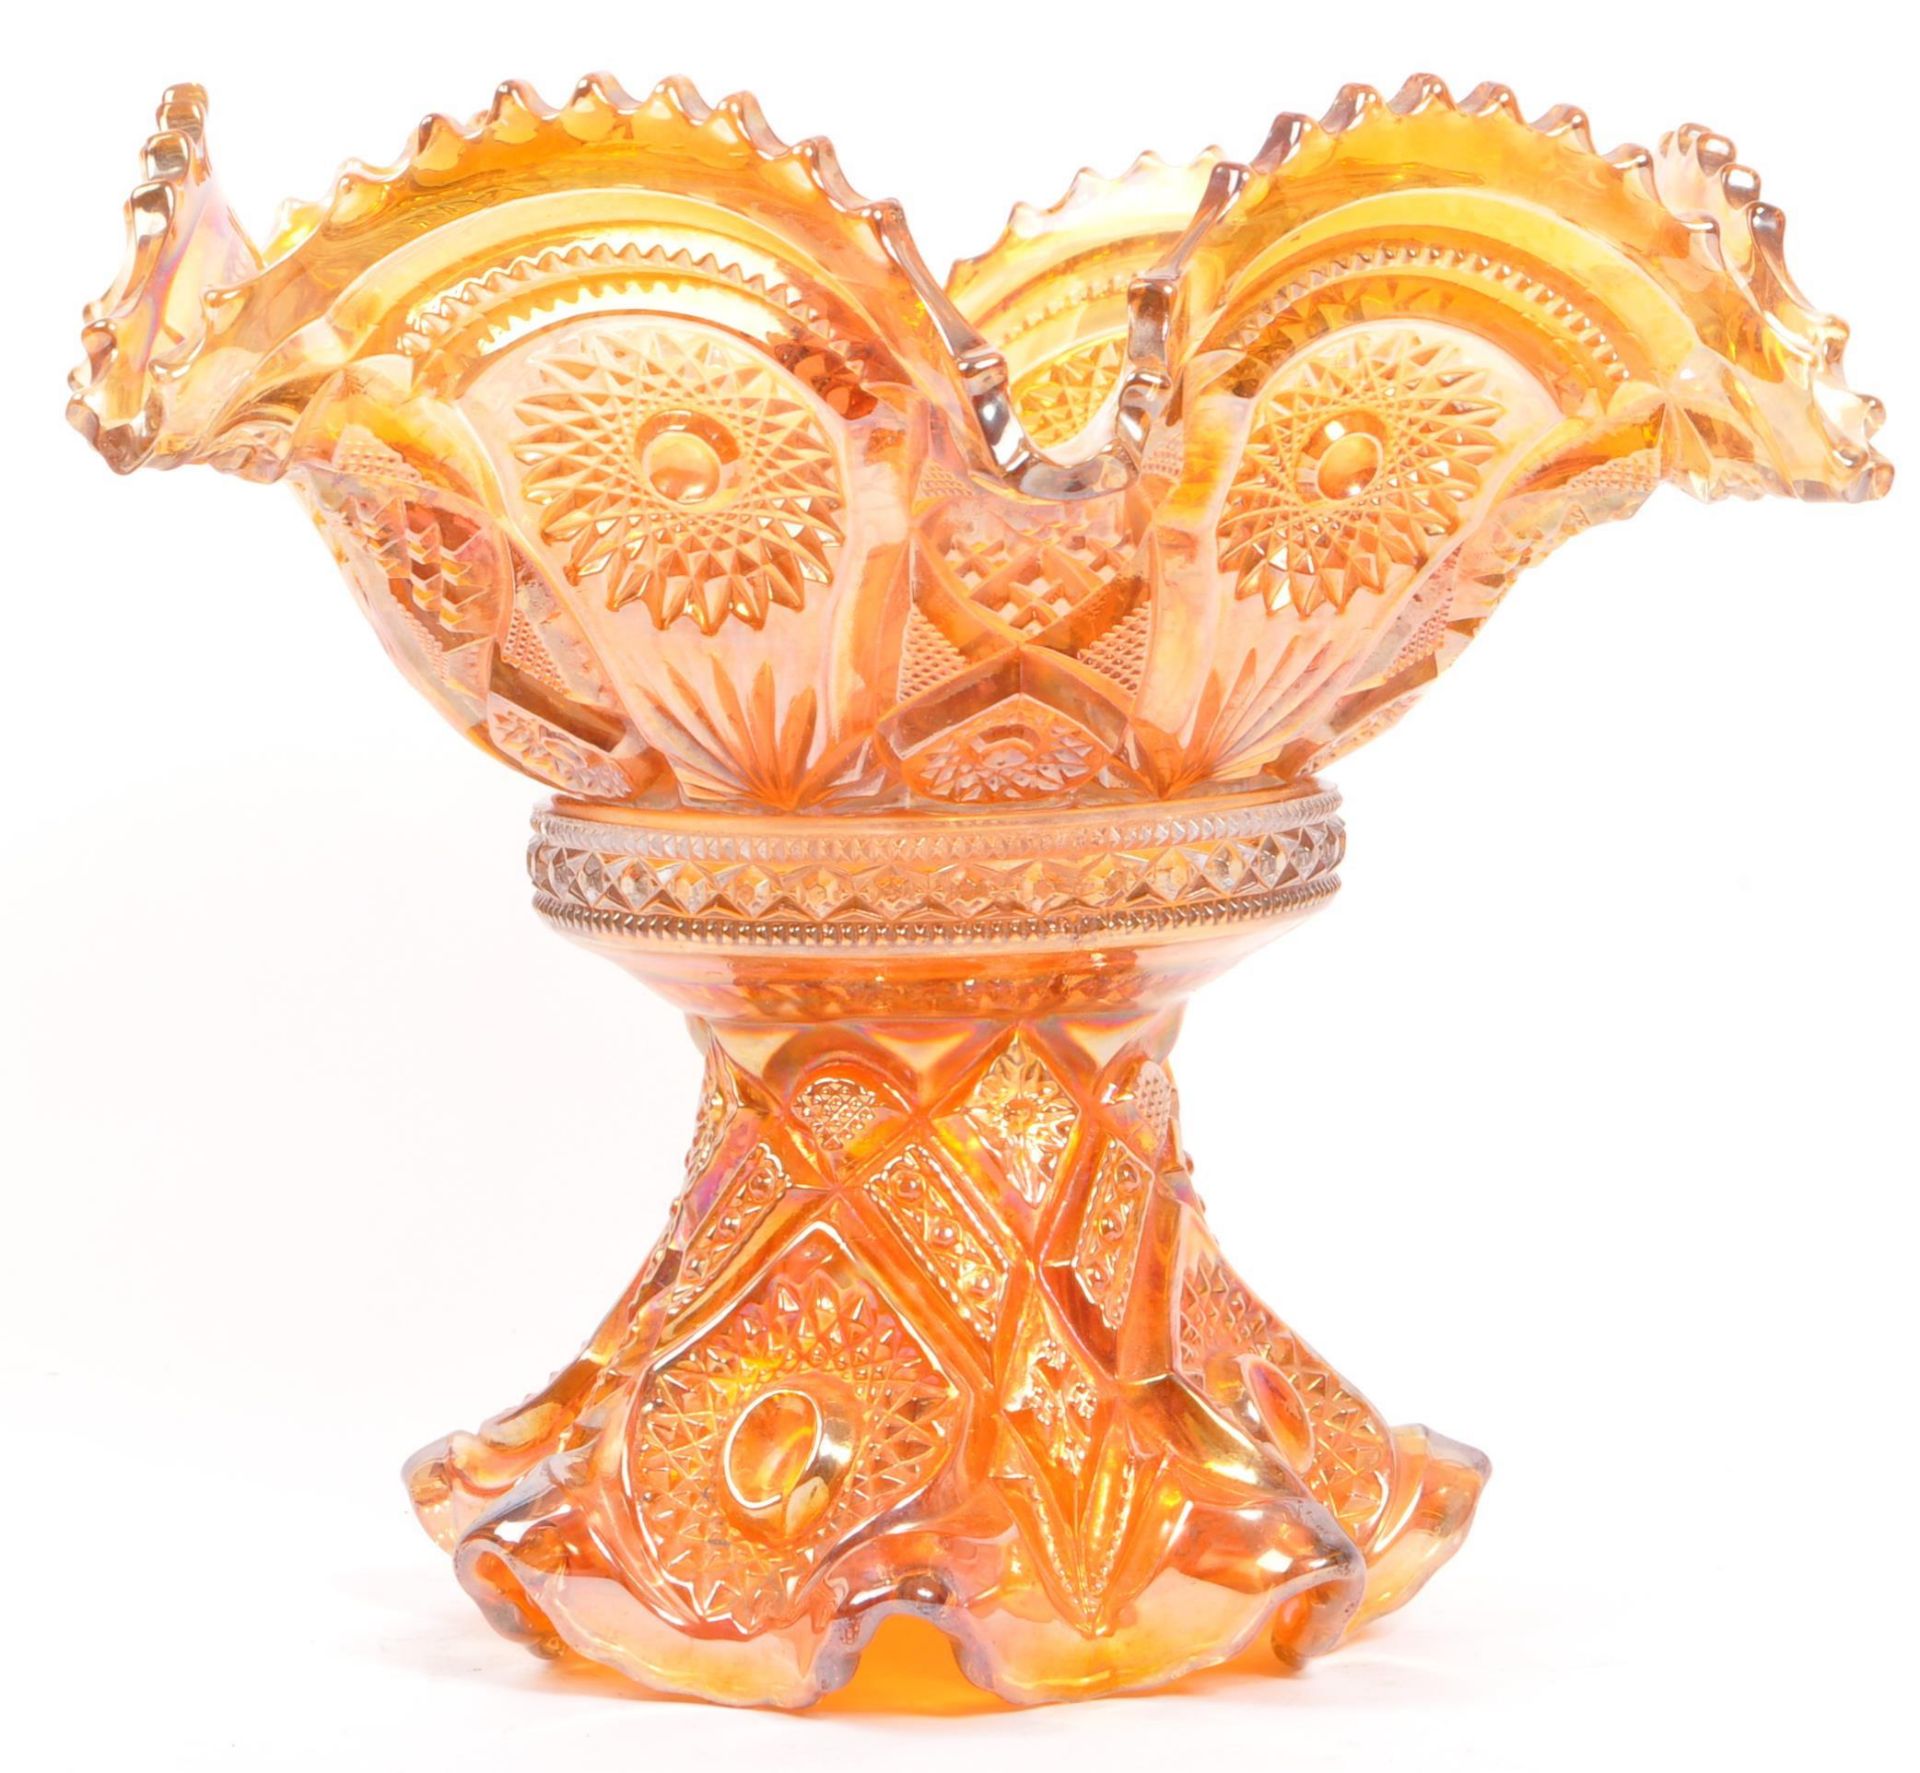 IRIDESCENT CARNIVAL GLASS MARIGOLD PUNCH BOWL - Image 2 of 10